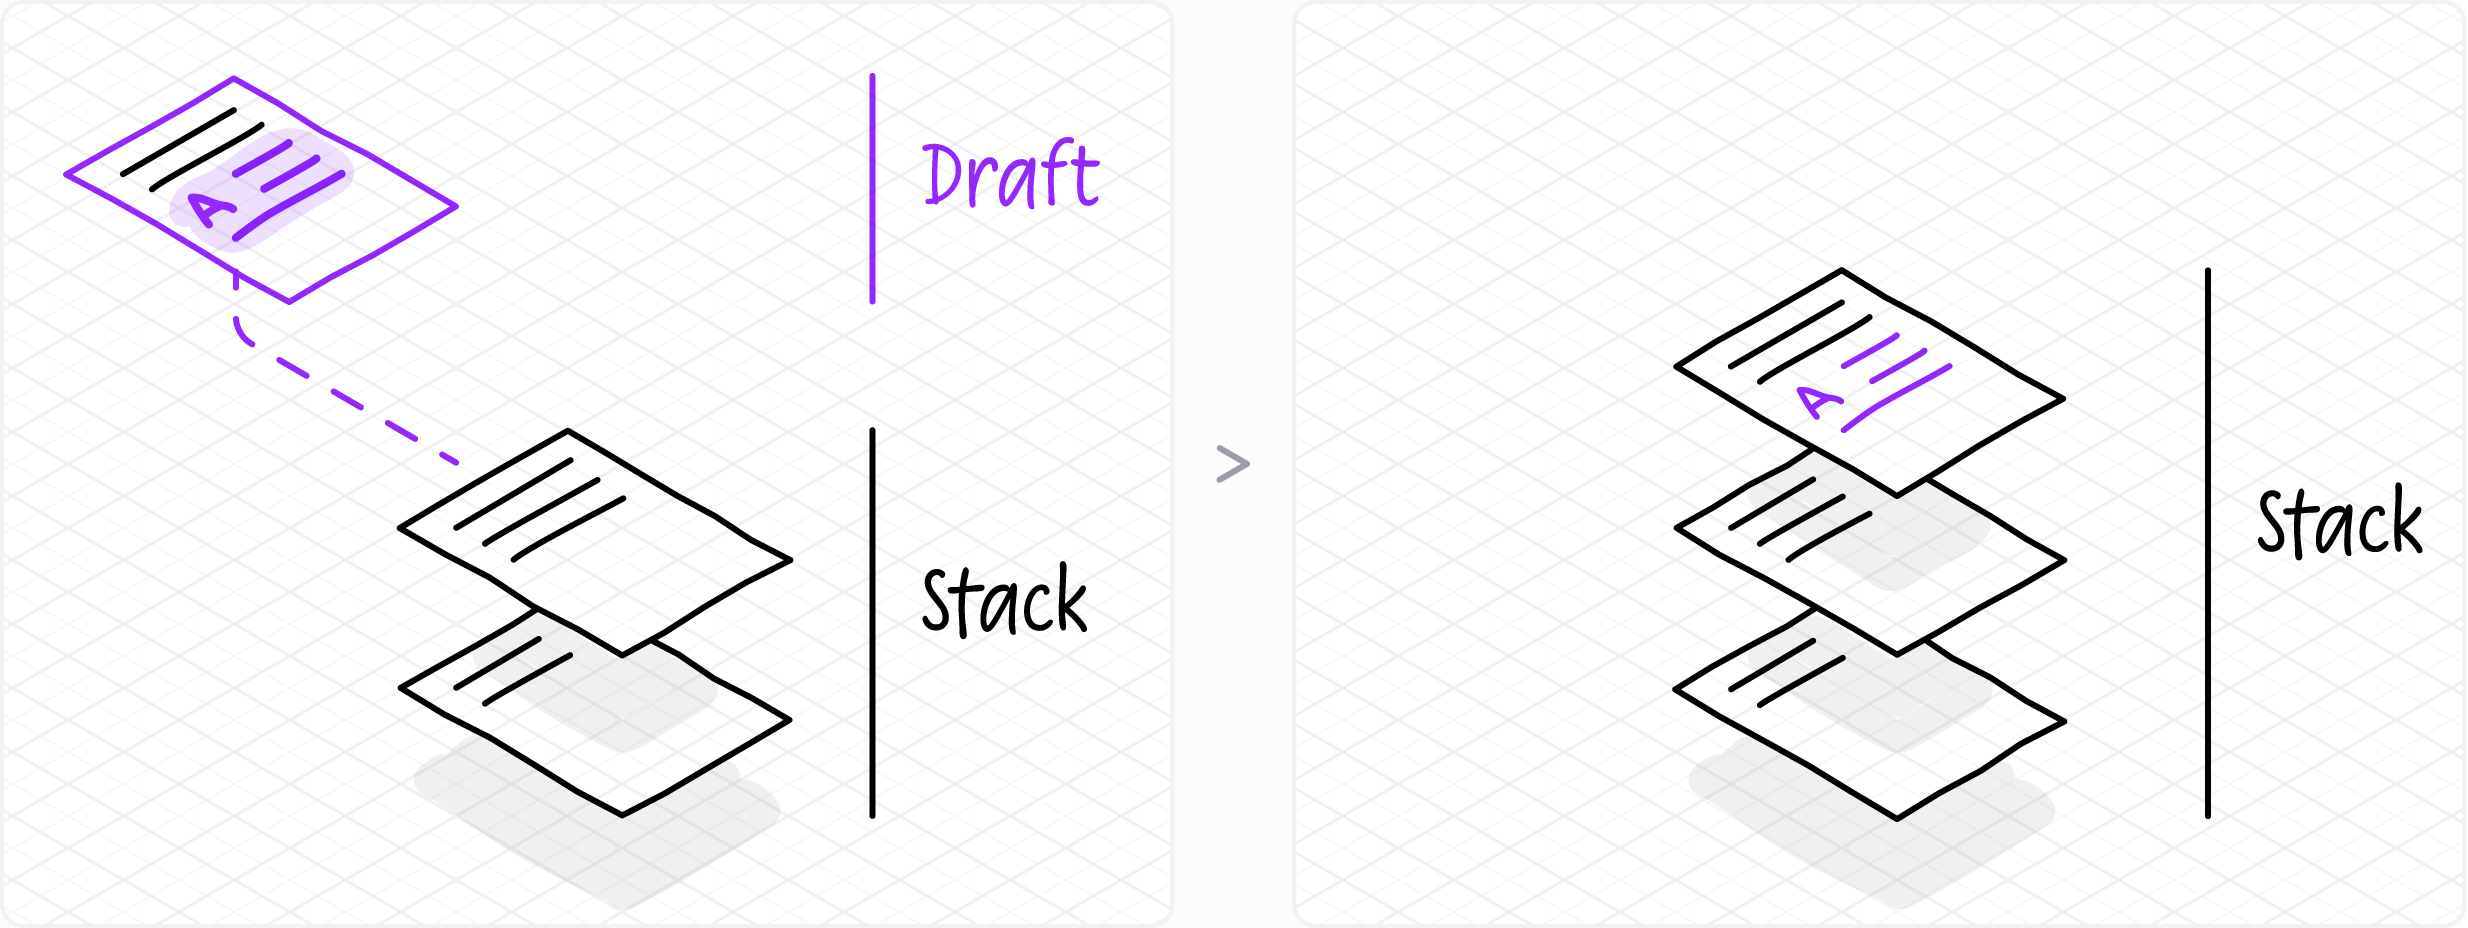 Merging DraftsChanges to the document must be made on a draft. When the draft is ready, it is merged onto the stack.